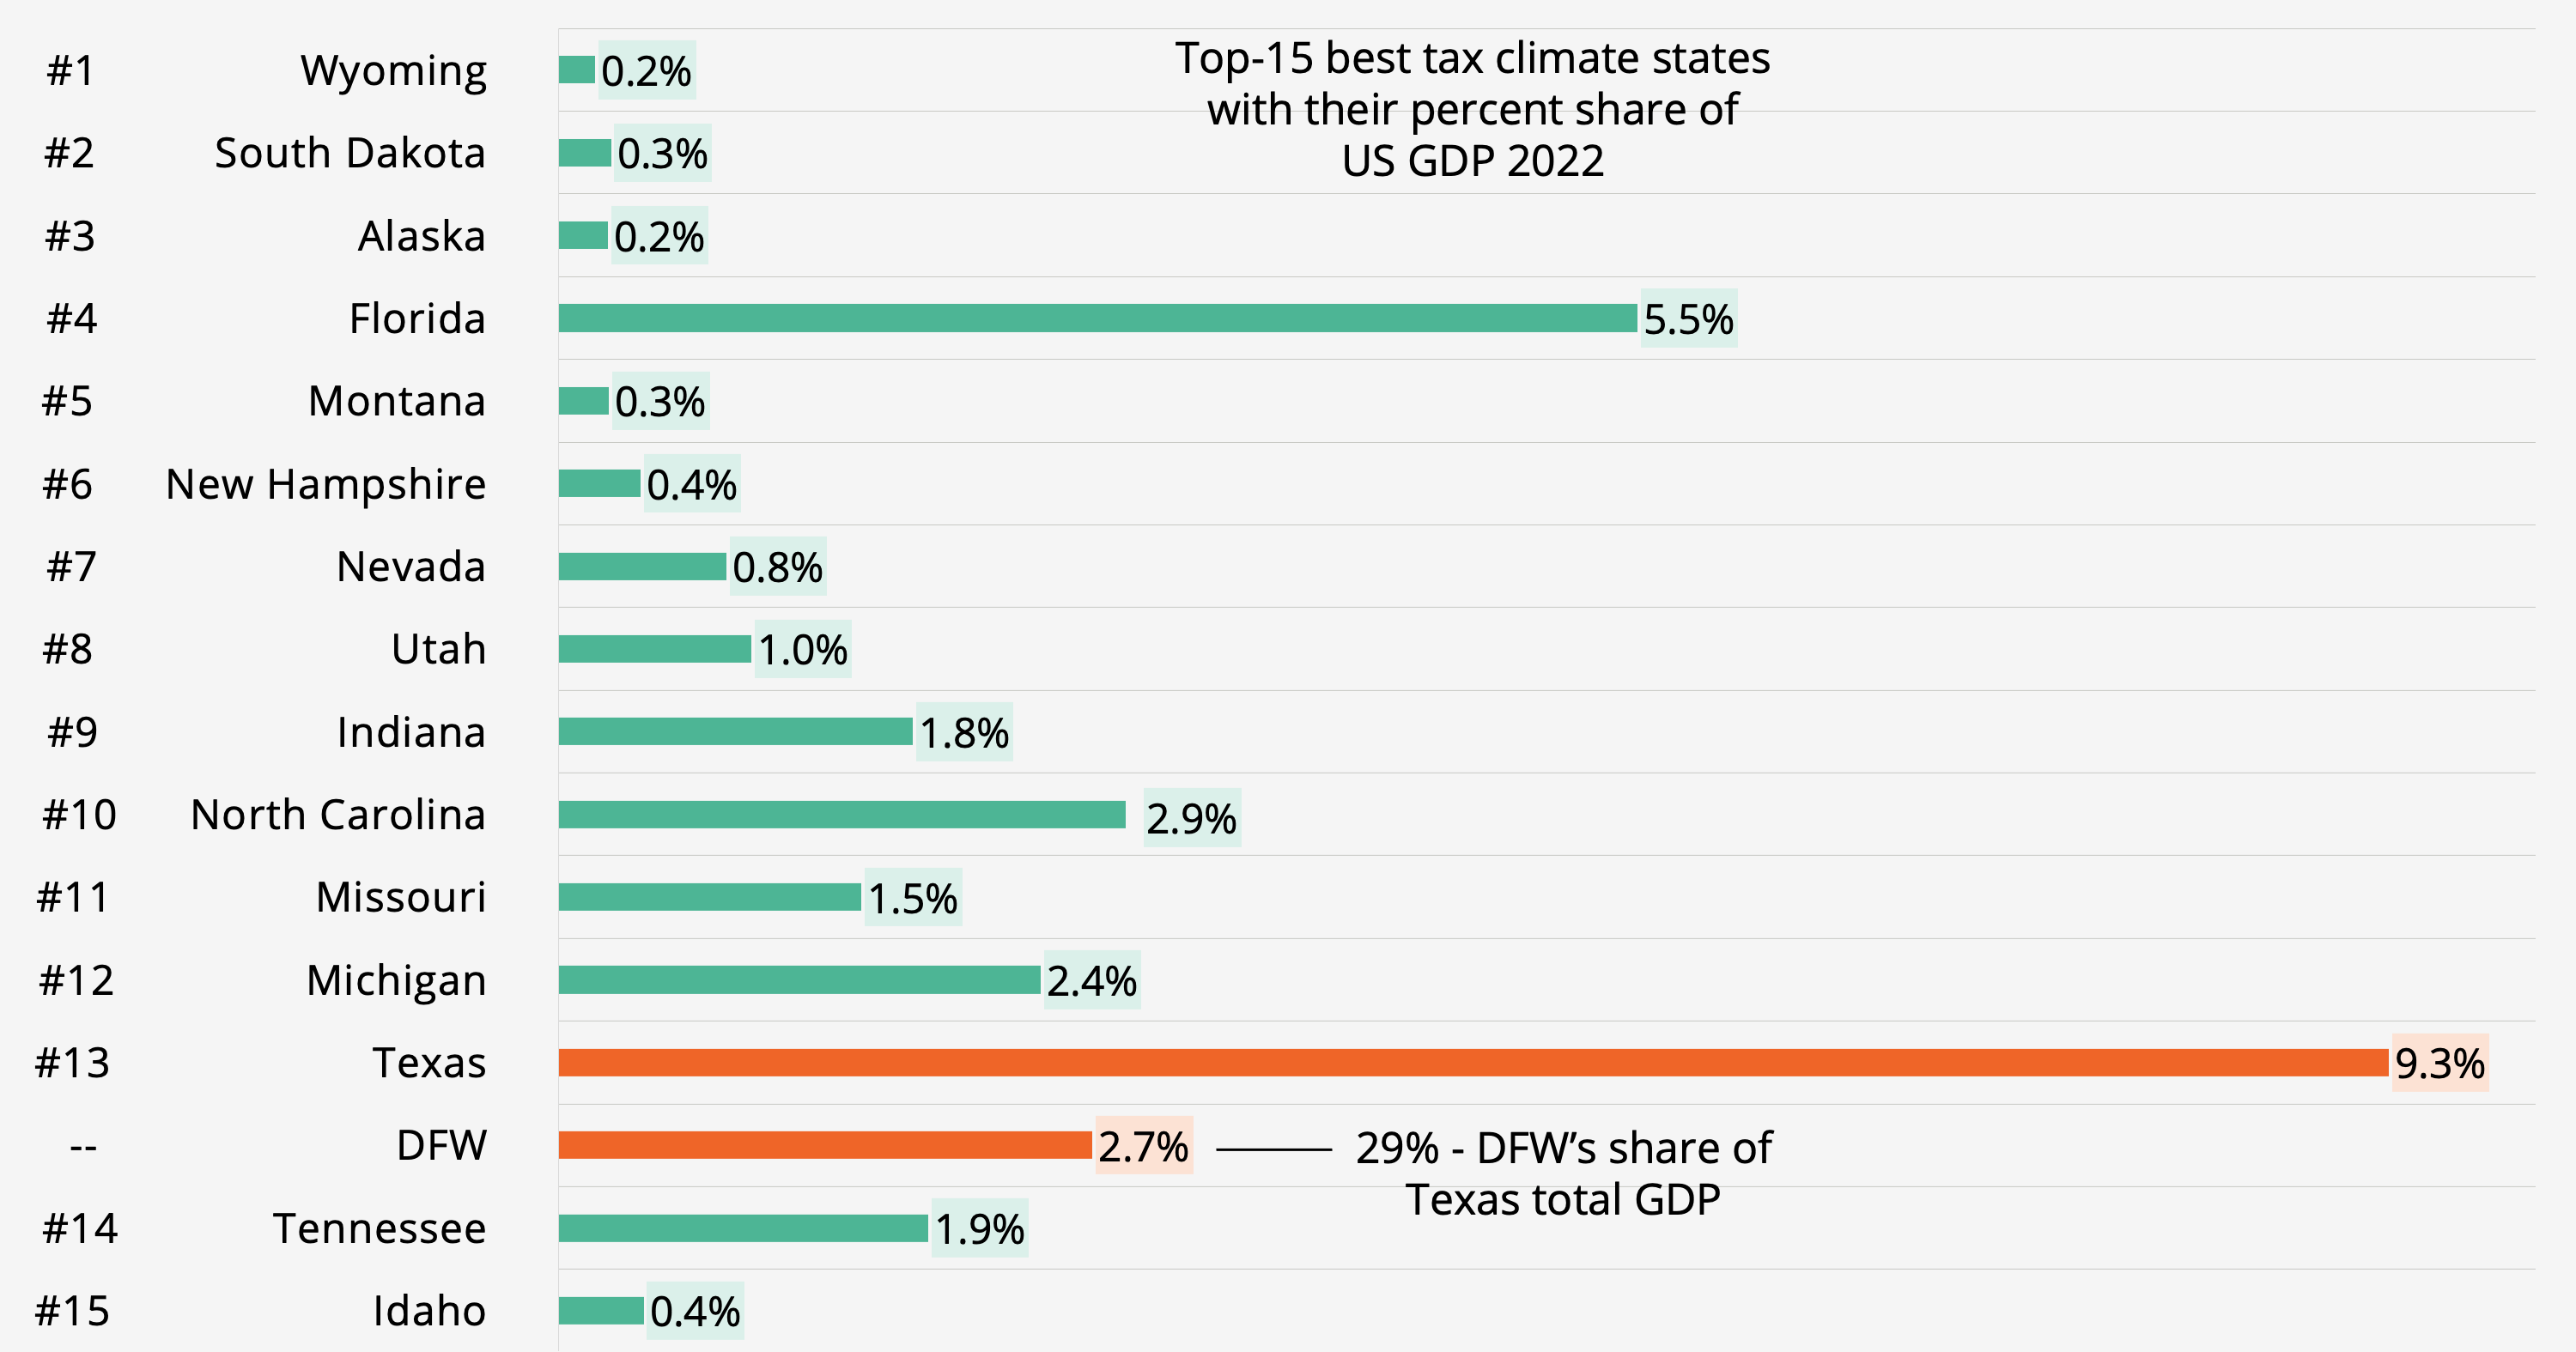 Bar graph of Top-15 best tax climate states with their percent share of U.S. GDP 2022 showing Dallas Fort Worth at 2.7% and Texas at 9.3%